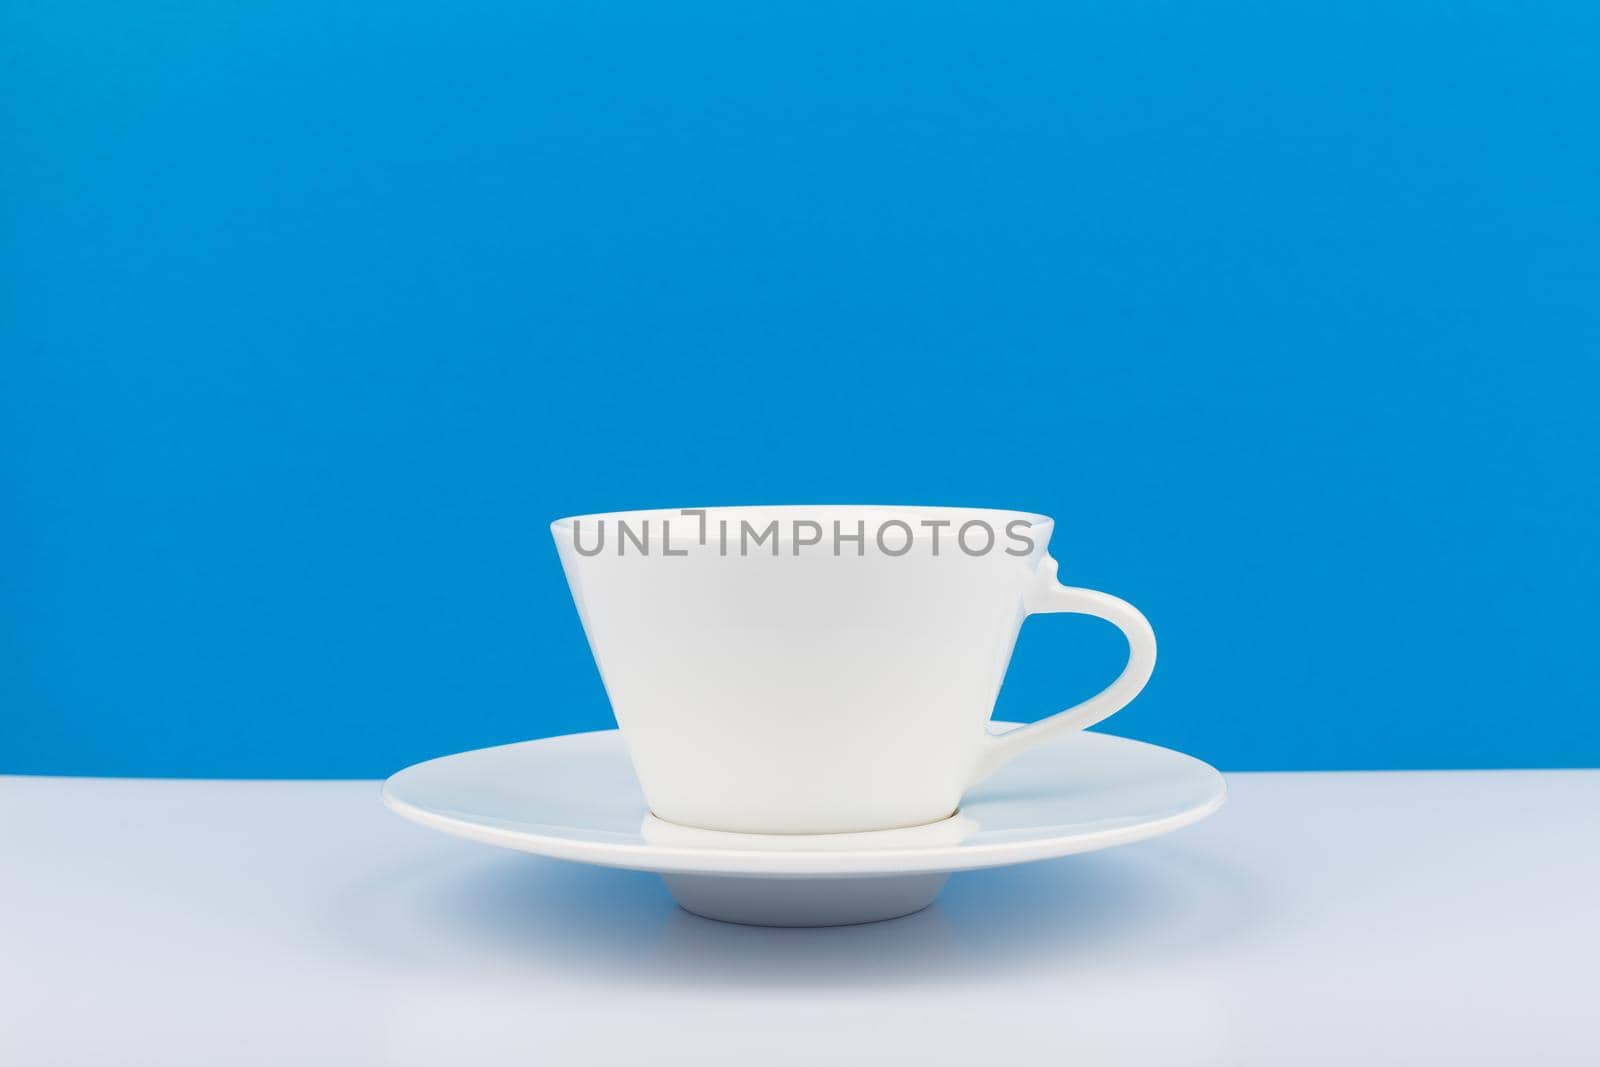 White ceramic coffee cup with a saucer on white table against blue background by Senorina_Irina